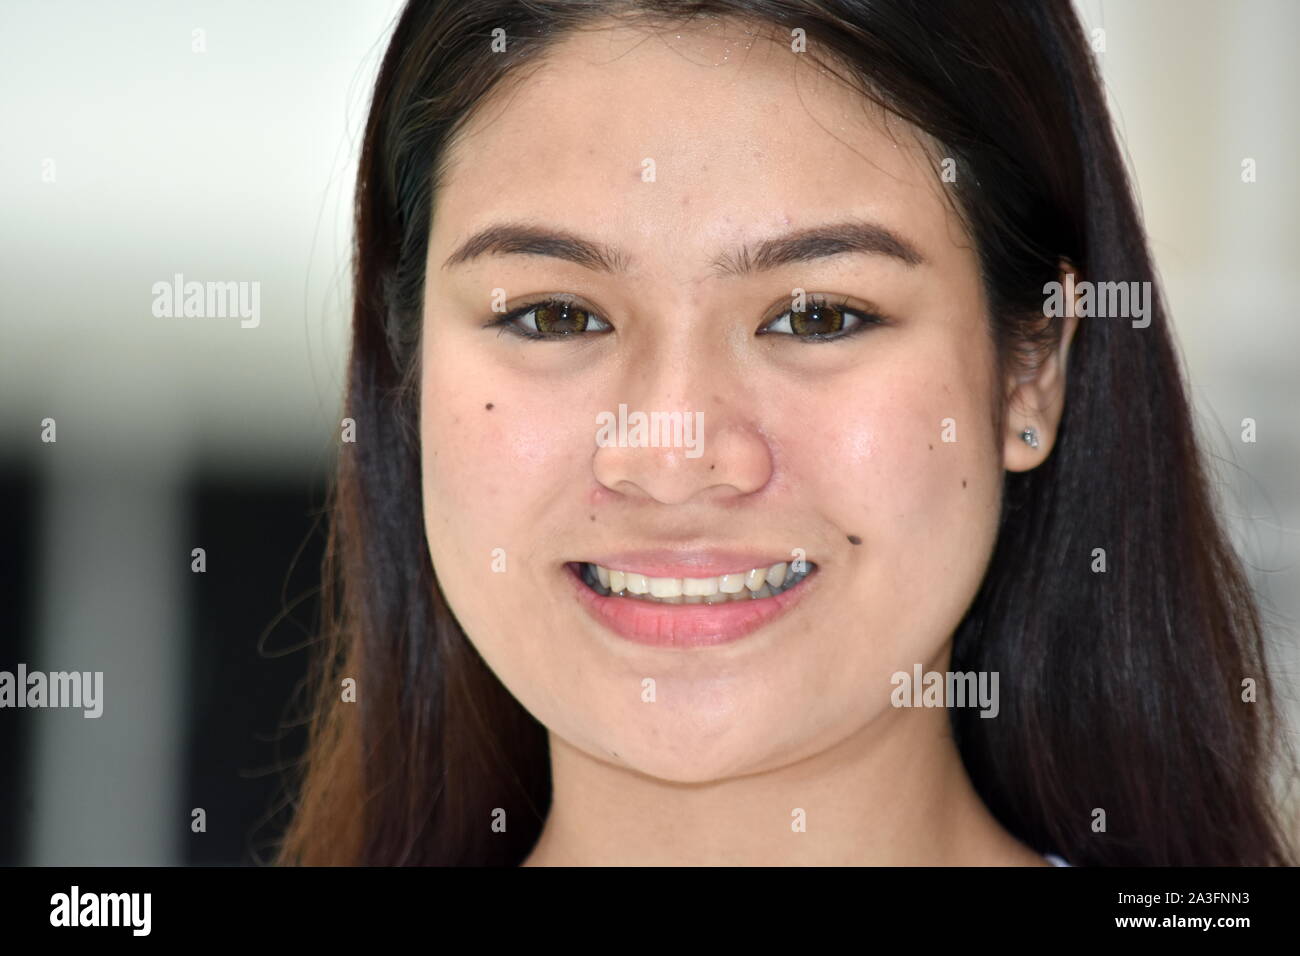 A Smiling Young Female Stock Photo